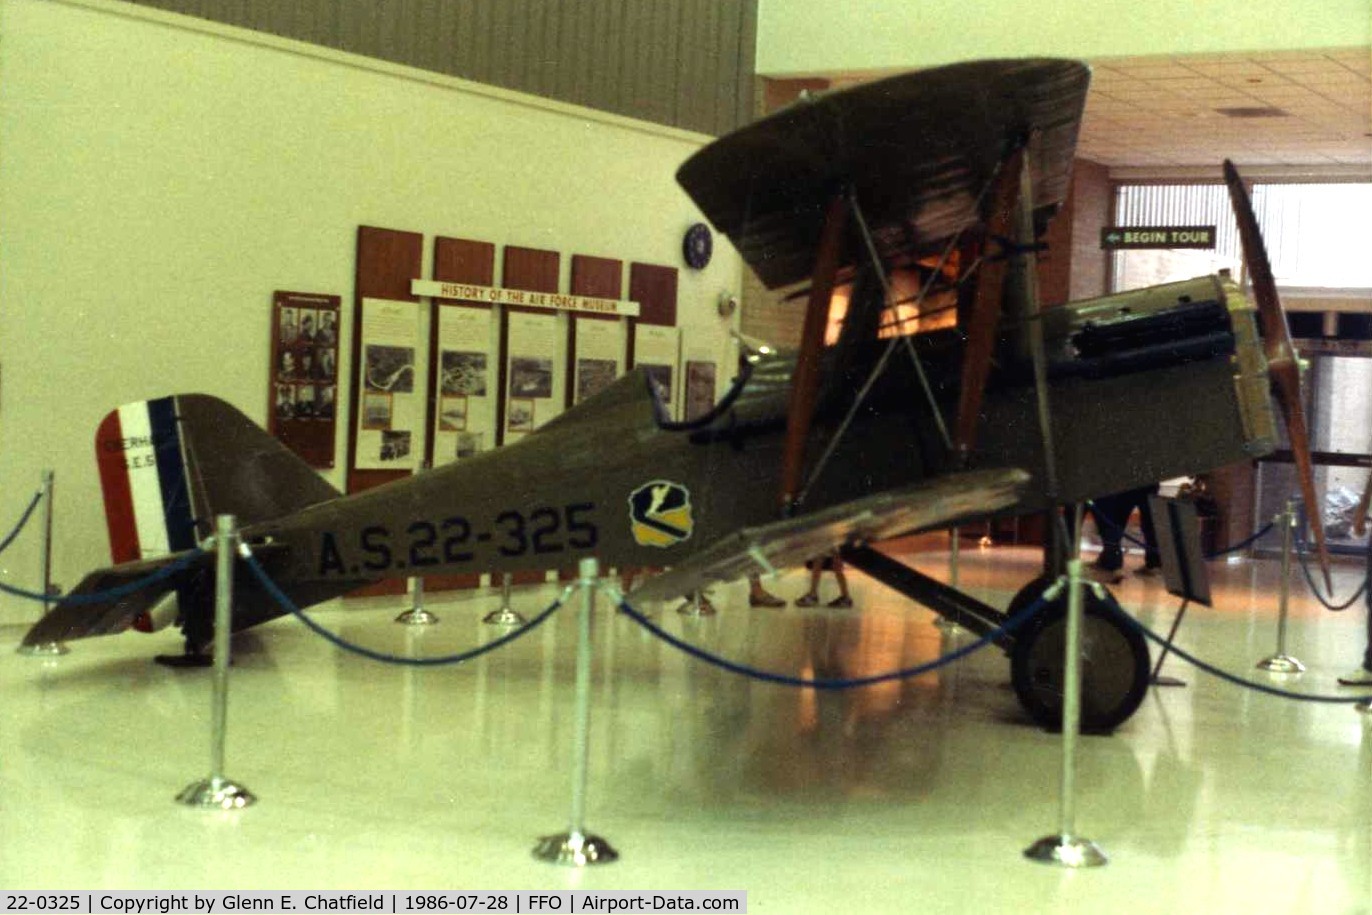 22-0325, 1922 Royal Aircraft Factory SE-5E Replica C/N Not found 22-0325, S.E. 5E at the National Museum of the U.S. Air Force